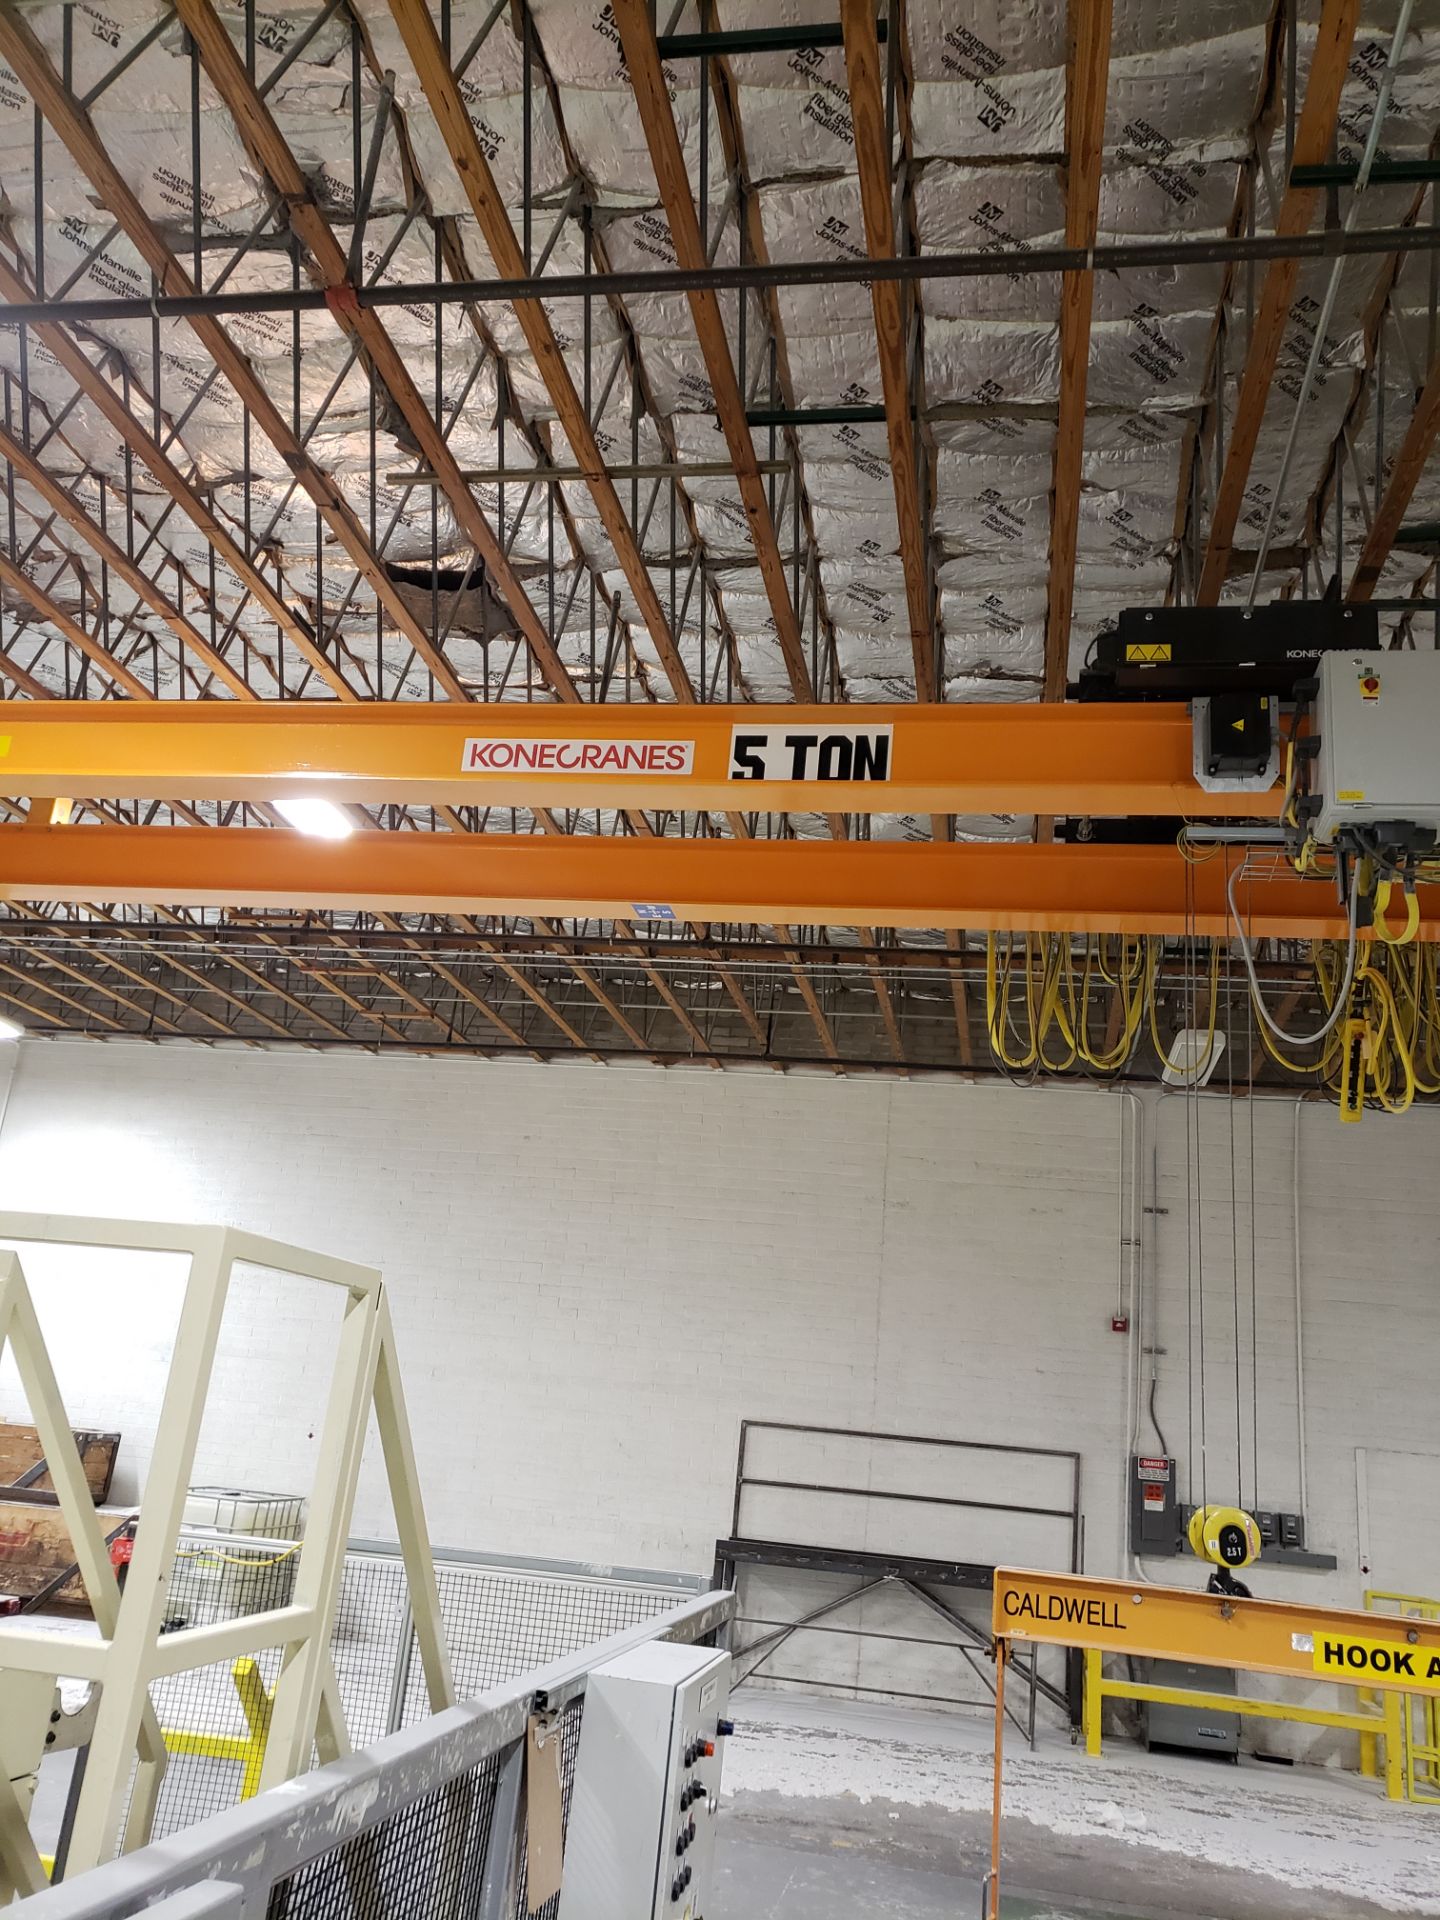 KONE CRANES 5-Ton Cap. Crane, 34.5 FT WIDE X 64 FT LONG X ABOUT 62 FT OF TRAVEL, 208" FROM THE FLOOR - Image 3 of 8